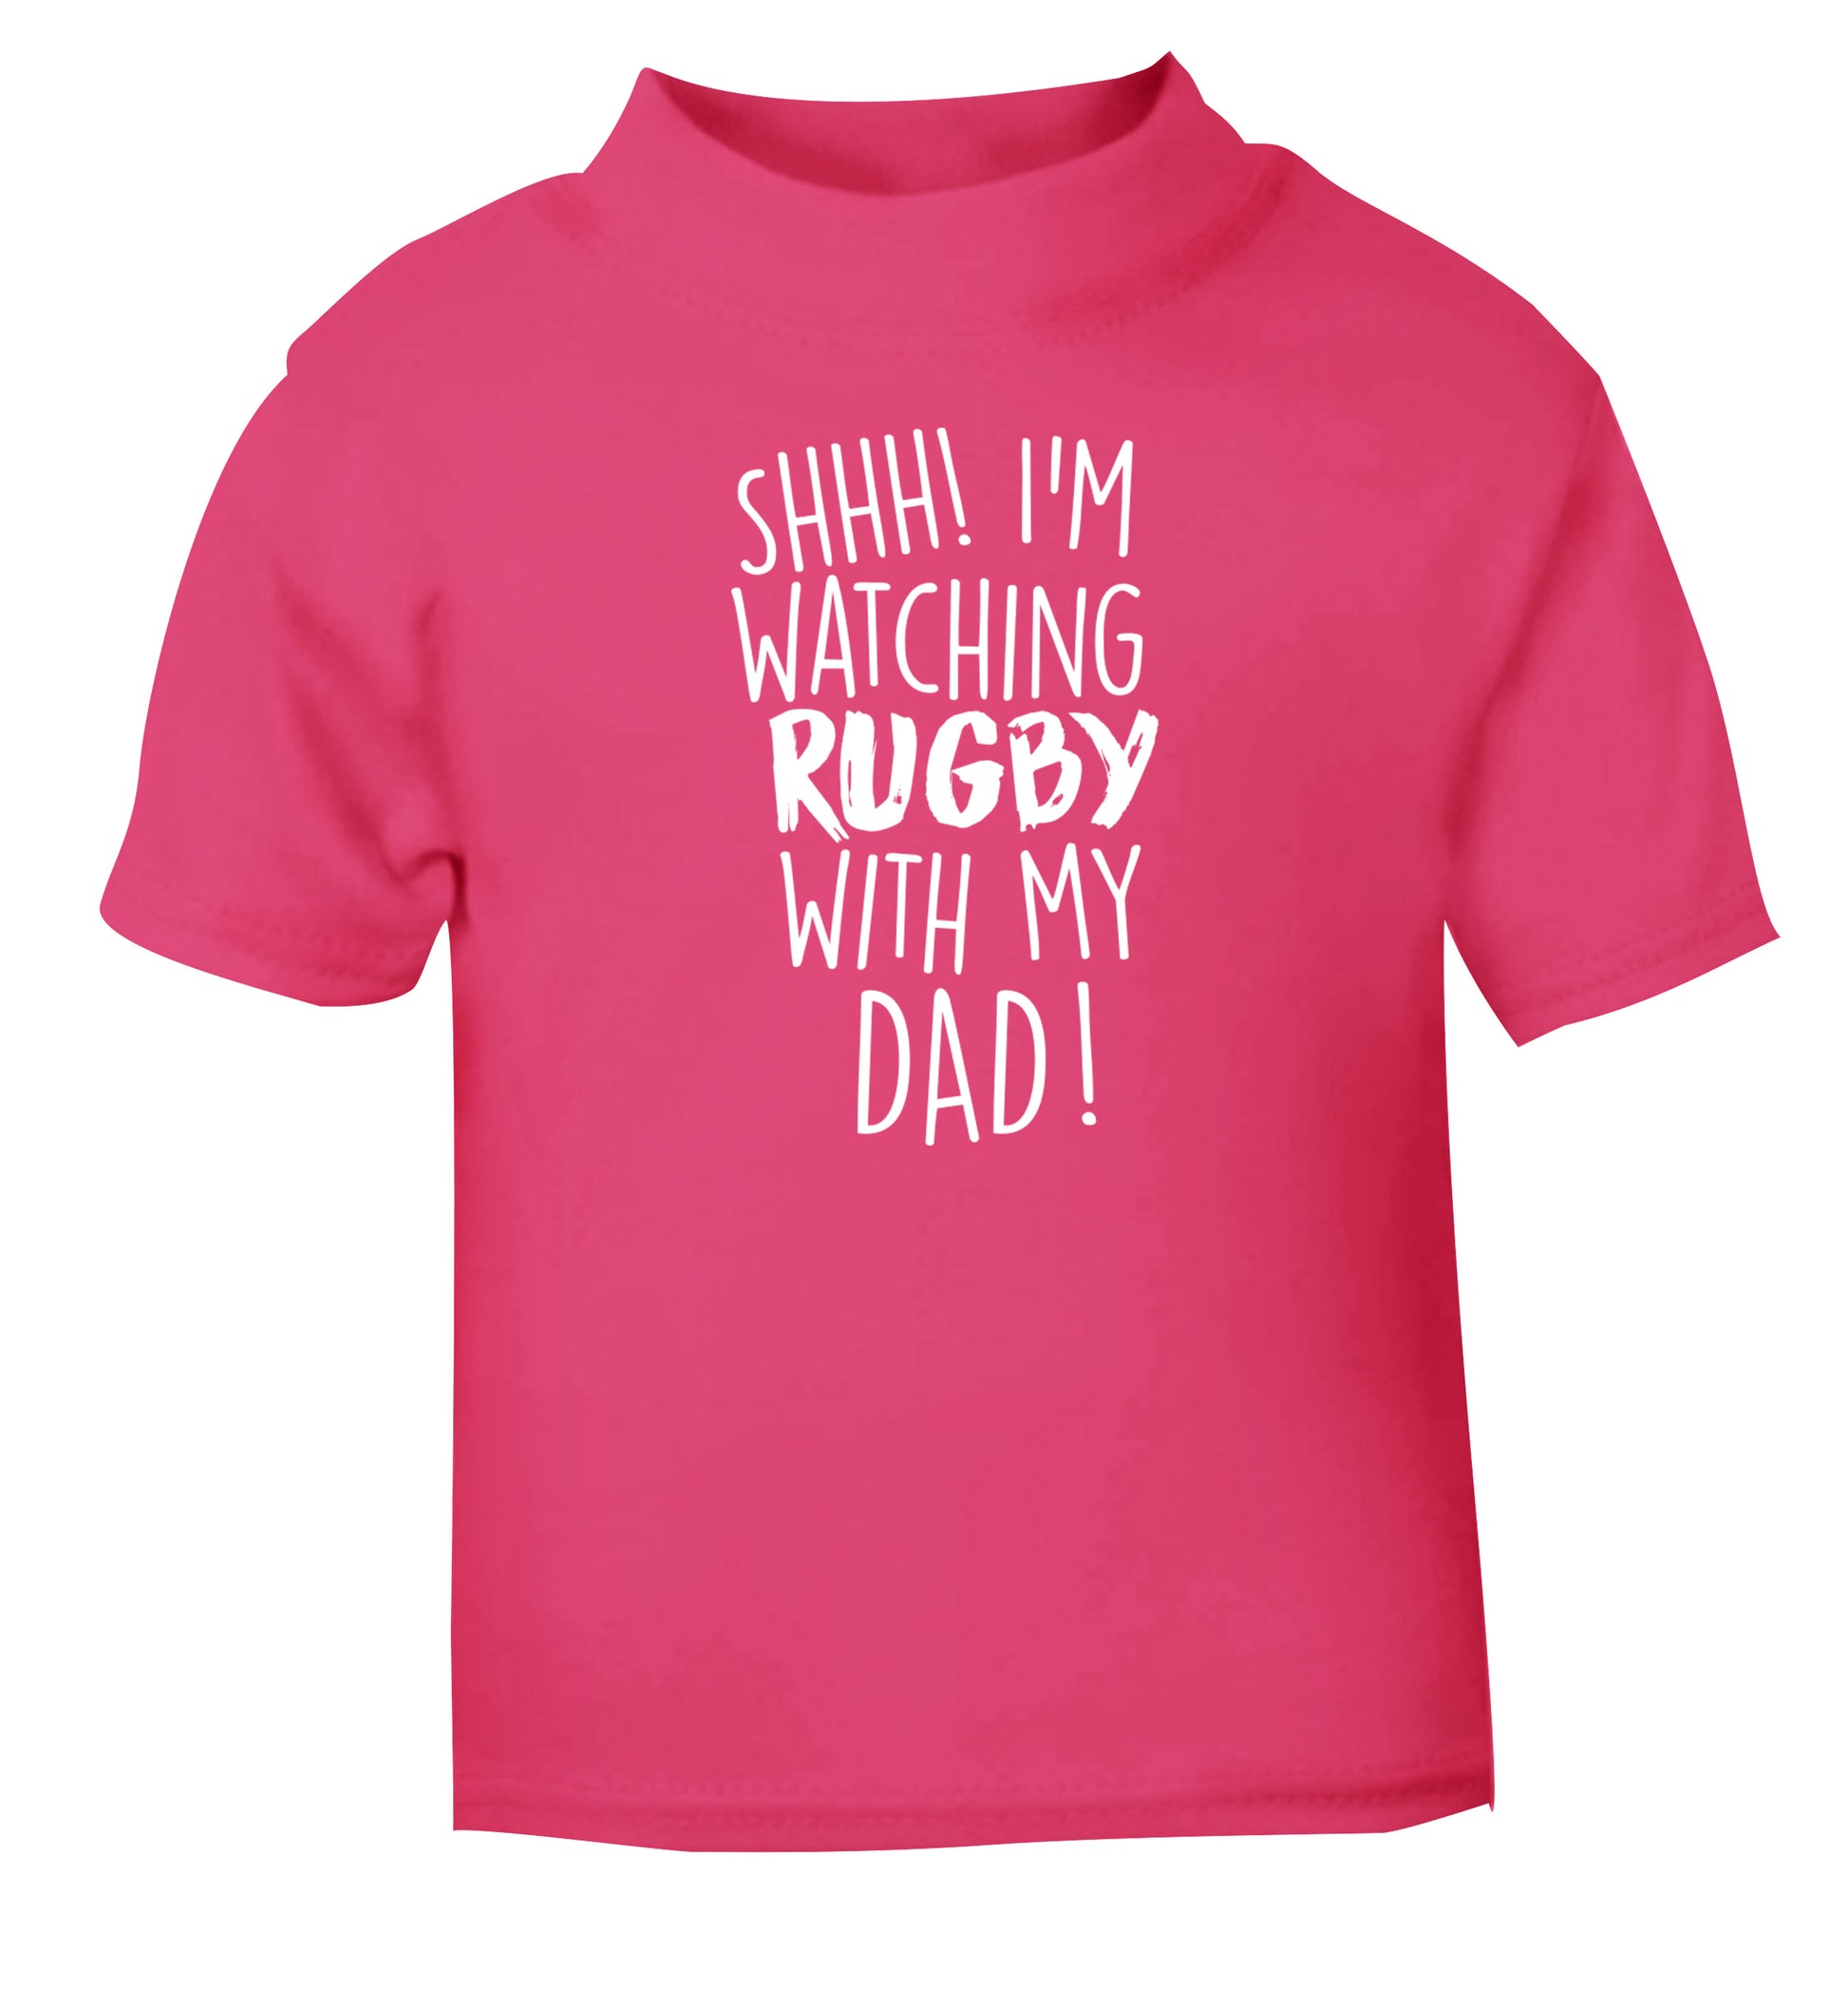 Shh... I'm watching rugby with my dad pink Baby Toddler Tshirt 2 Years